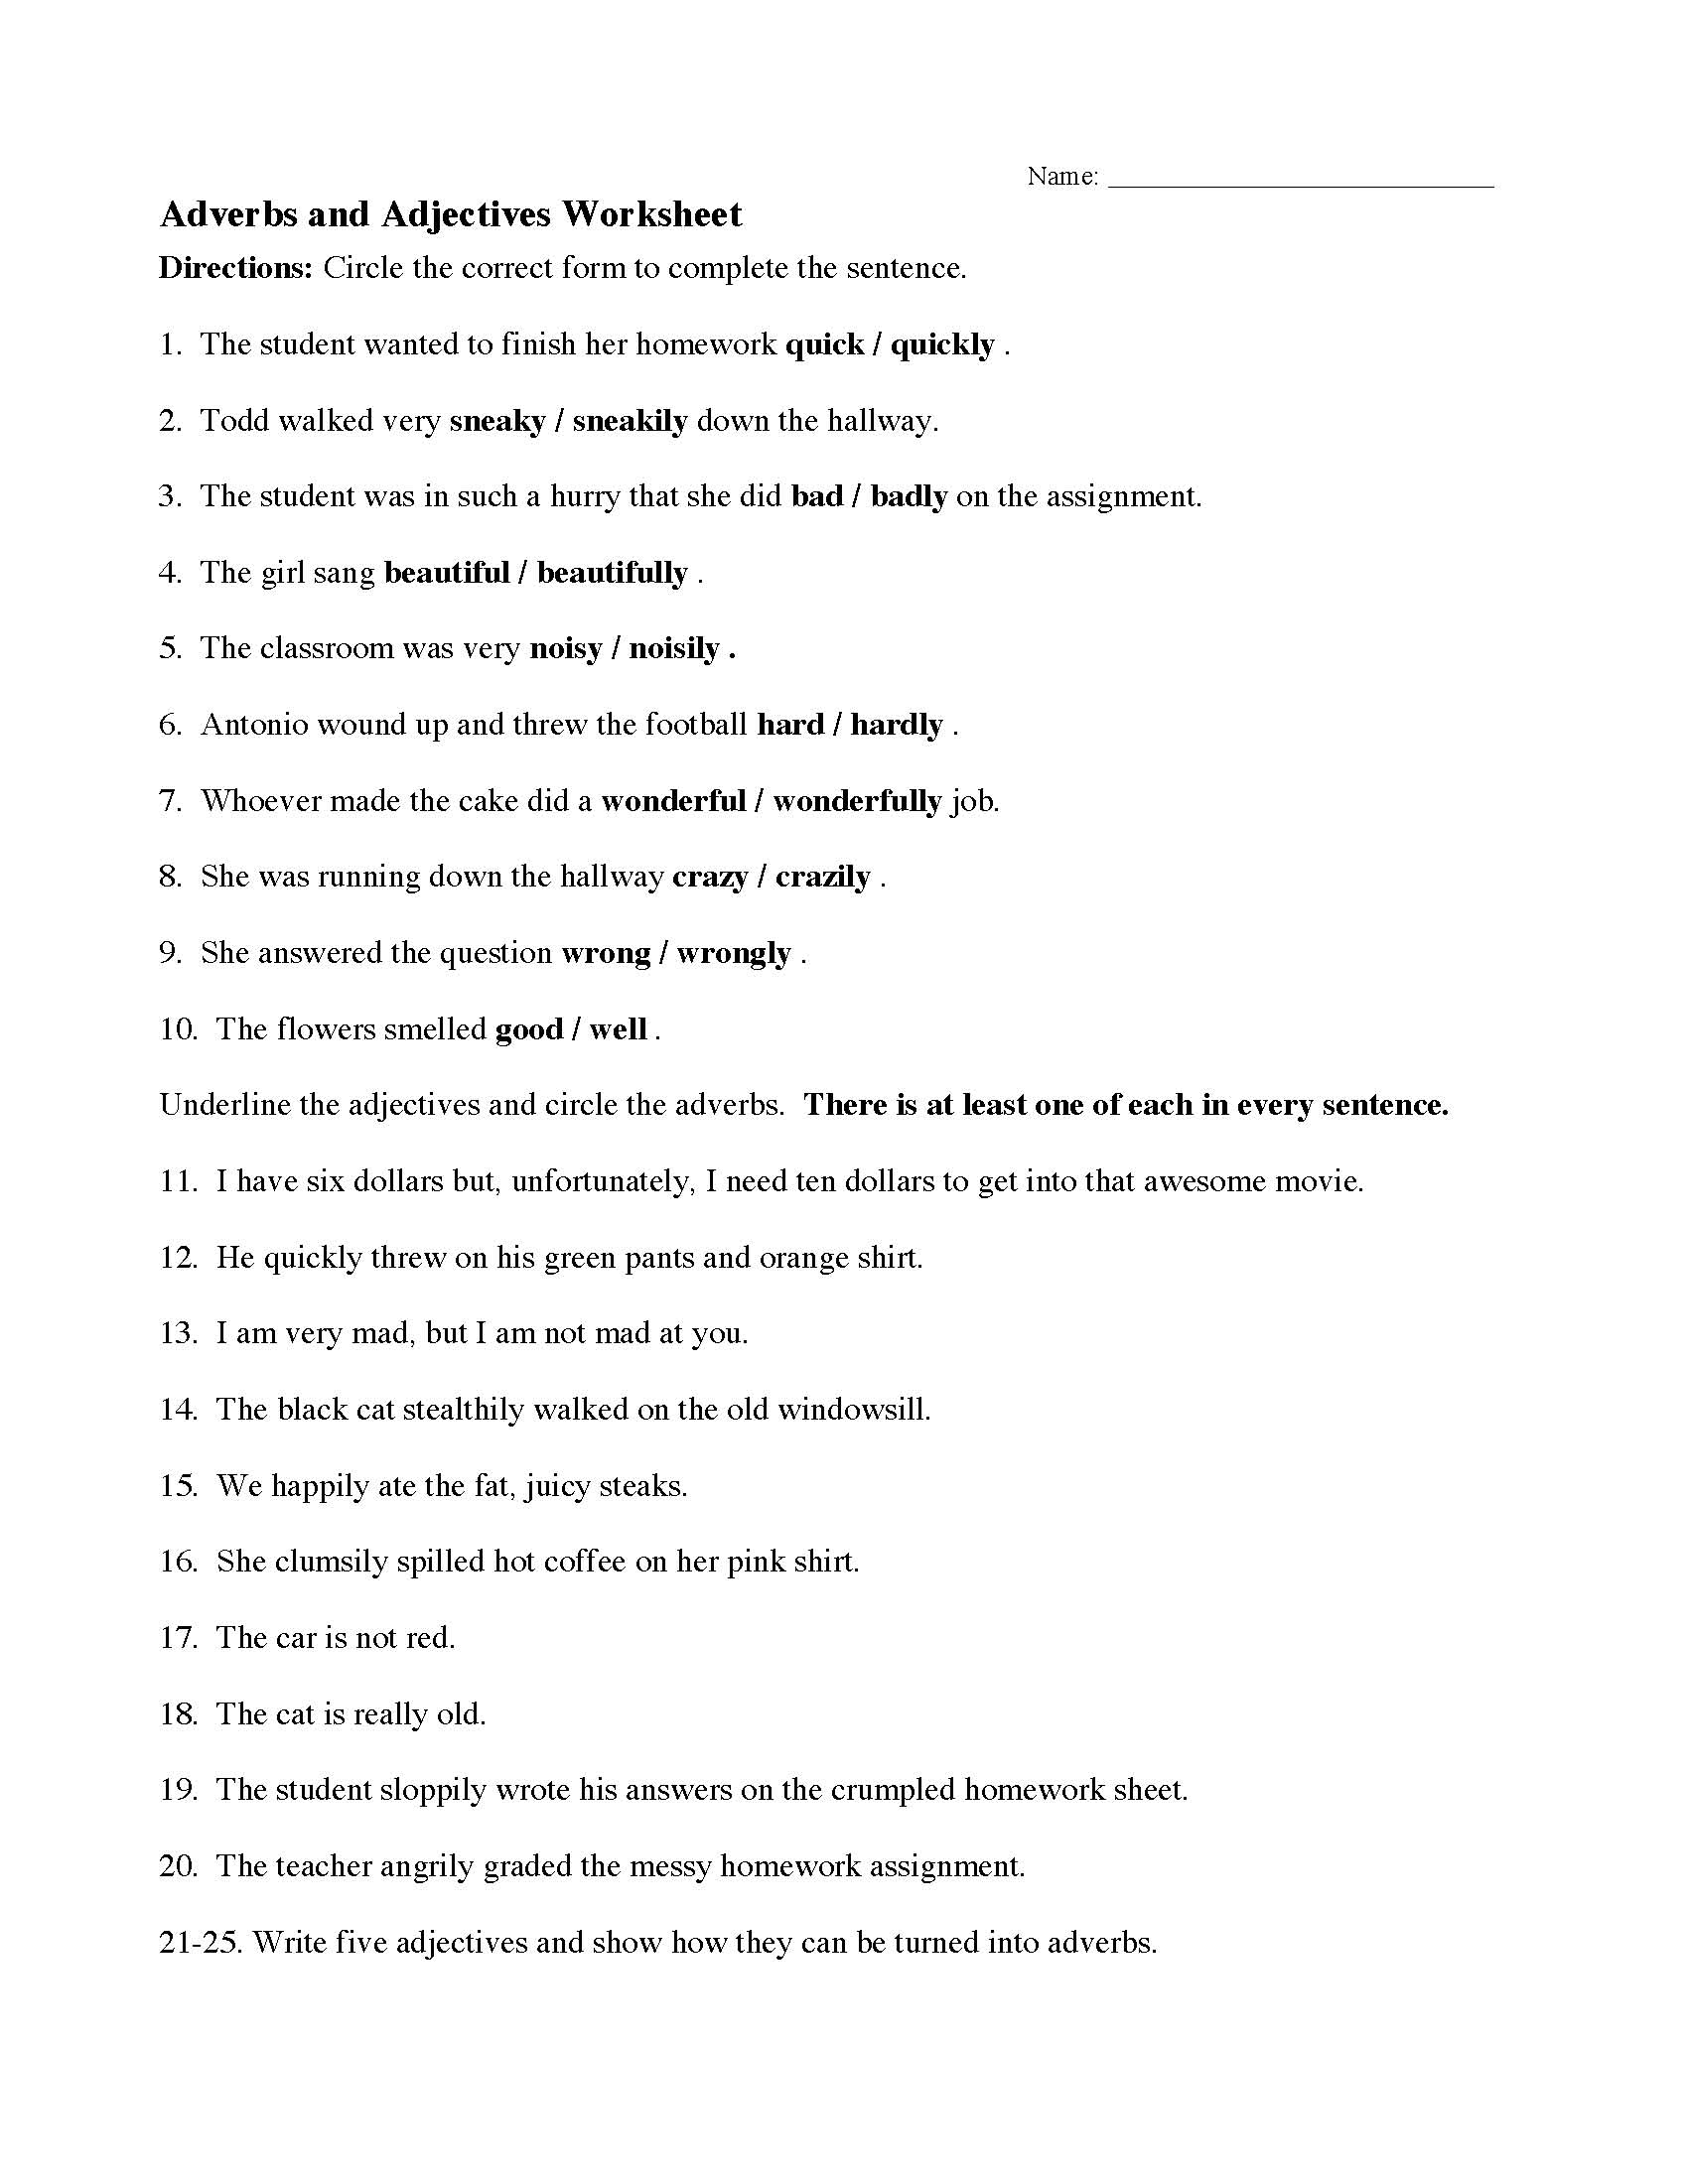 This is a preview image of the Adverbs and Adjectives Worksheet.